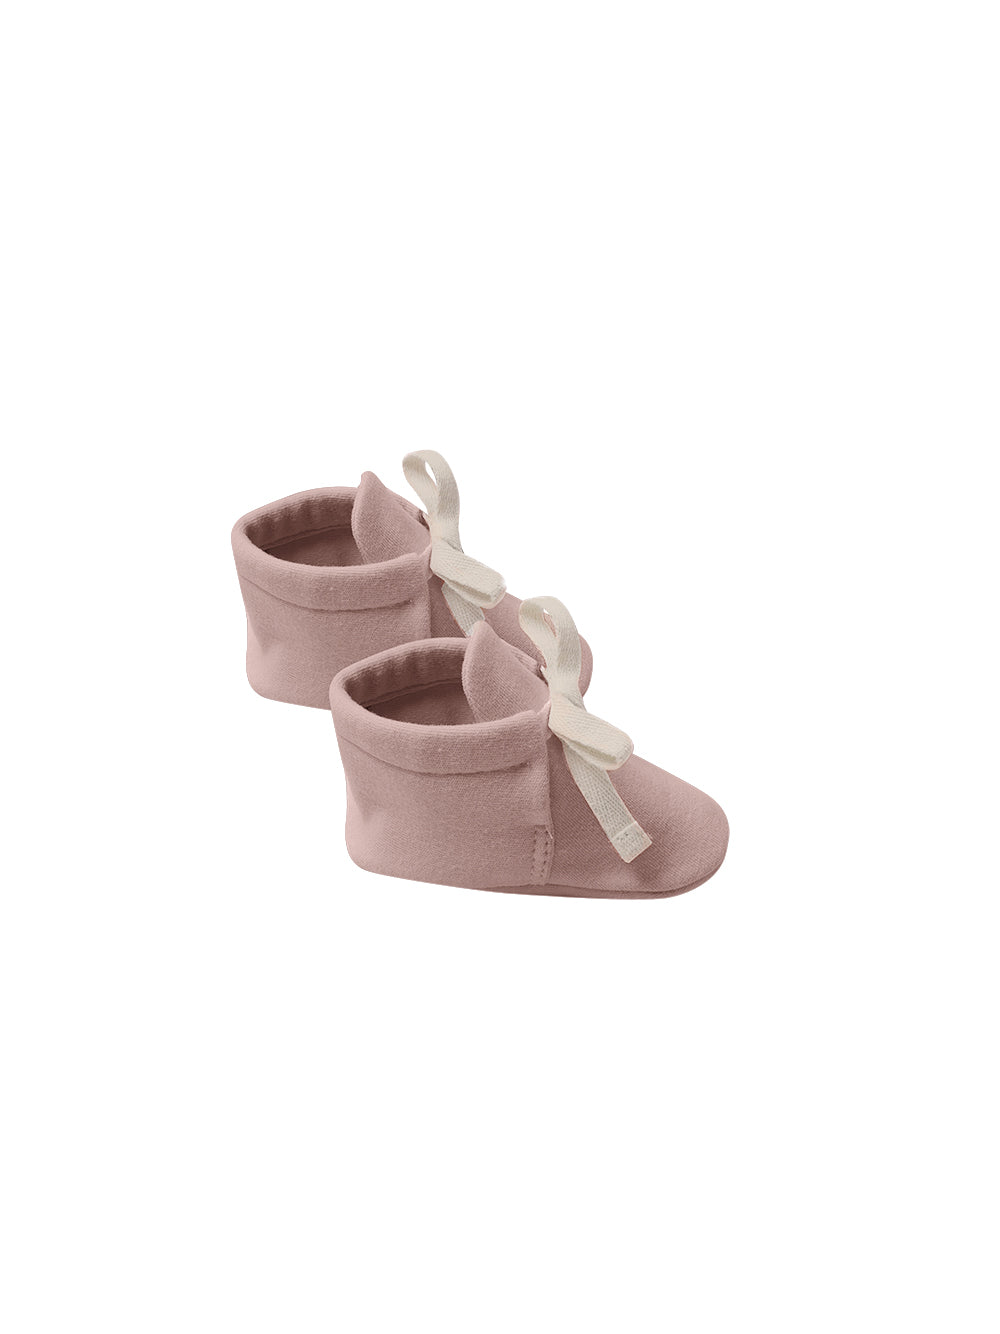 baby booties (more colors)